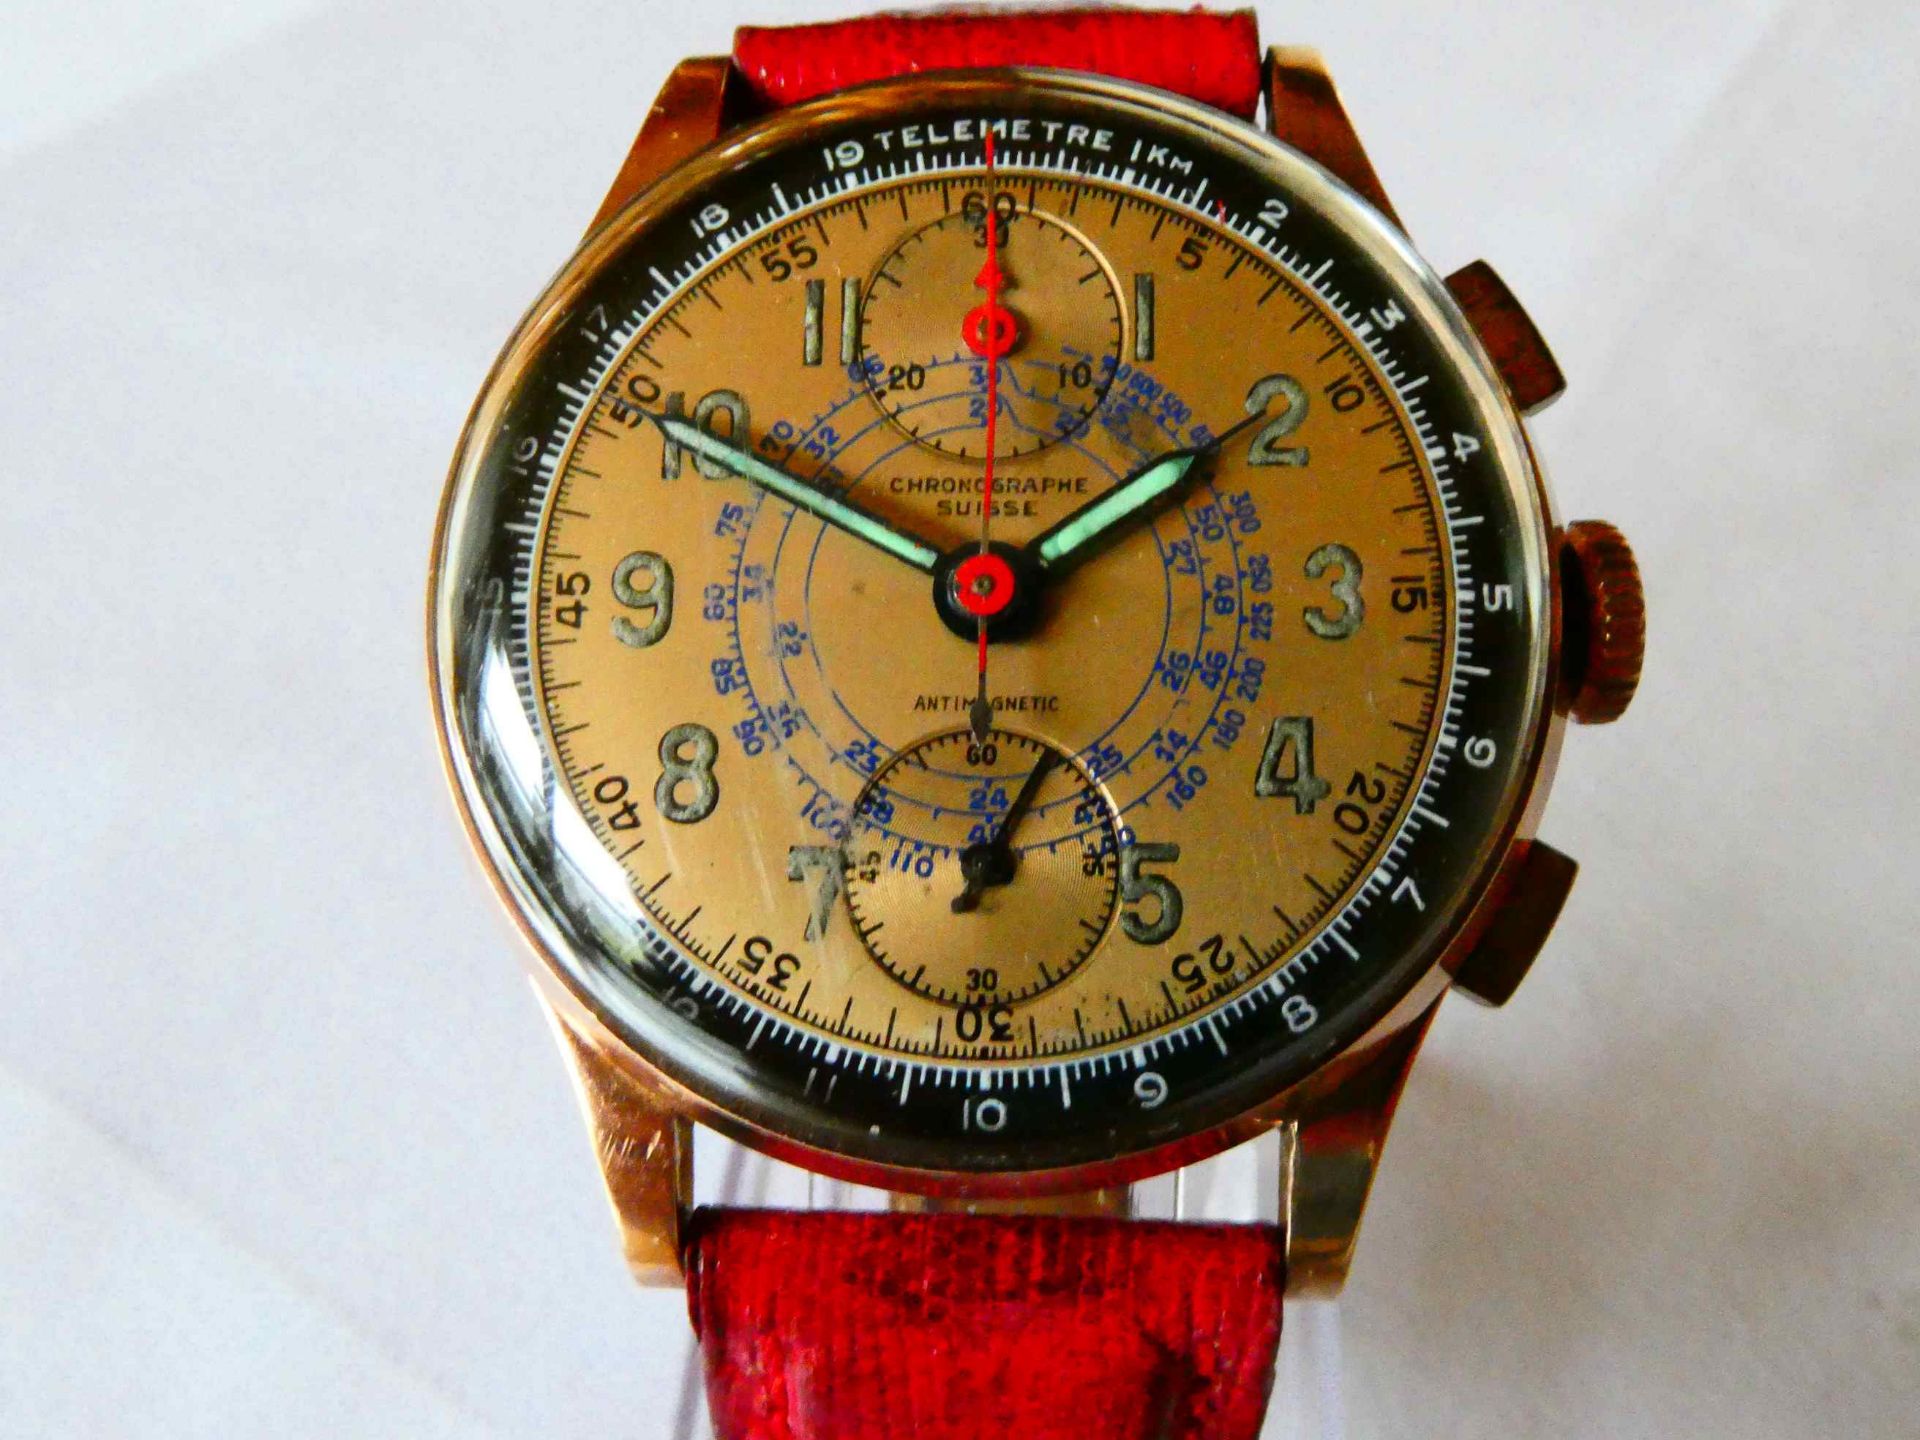 Chronographe Suisse in 18K Gold